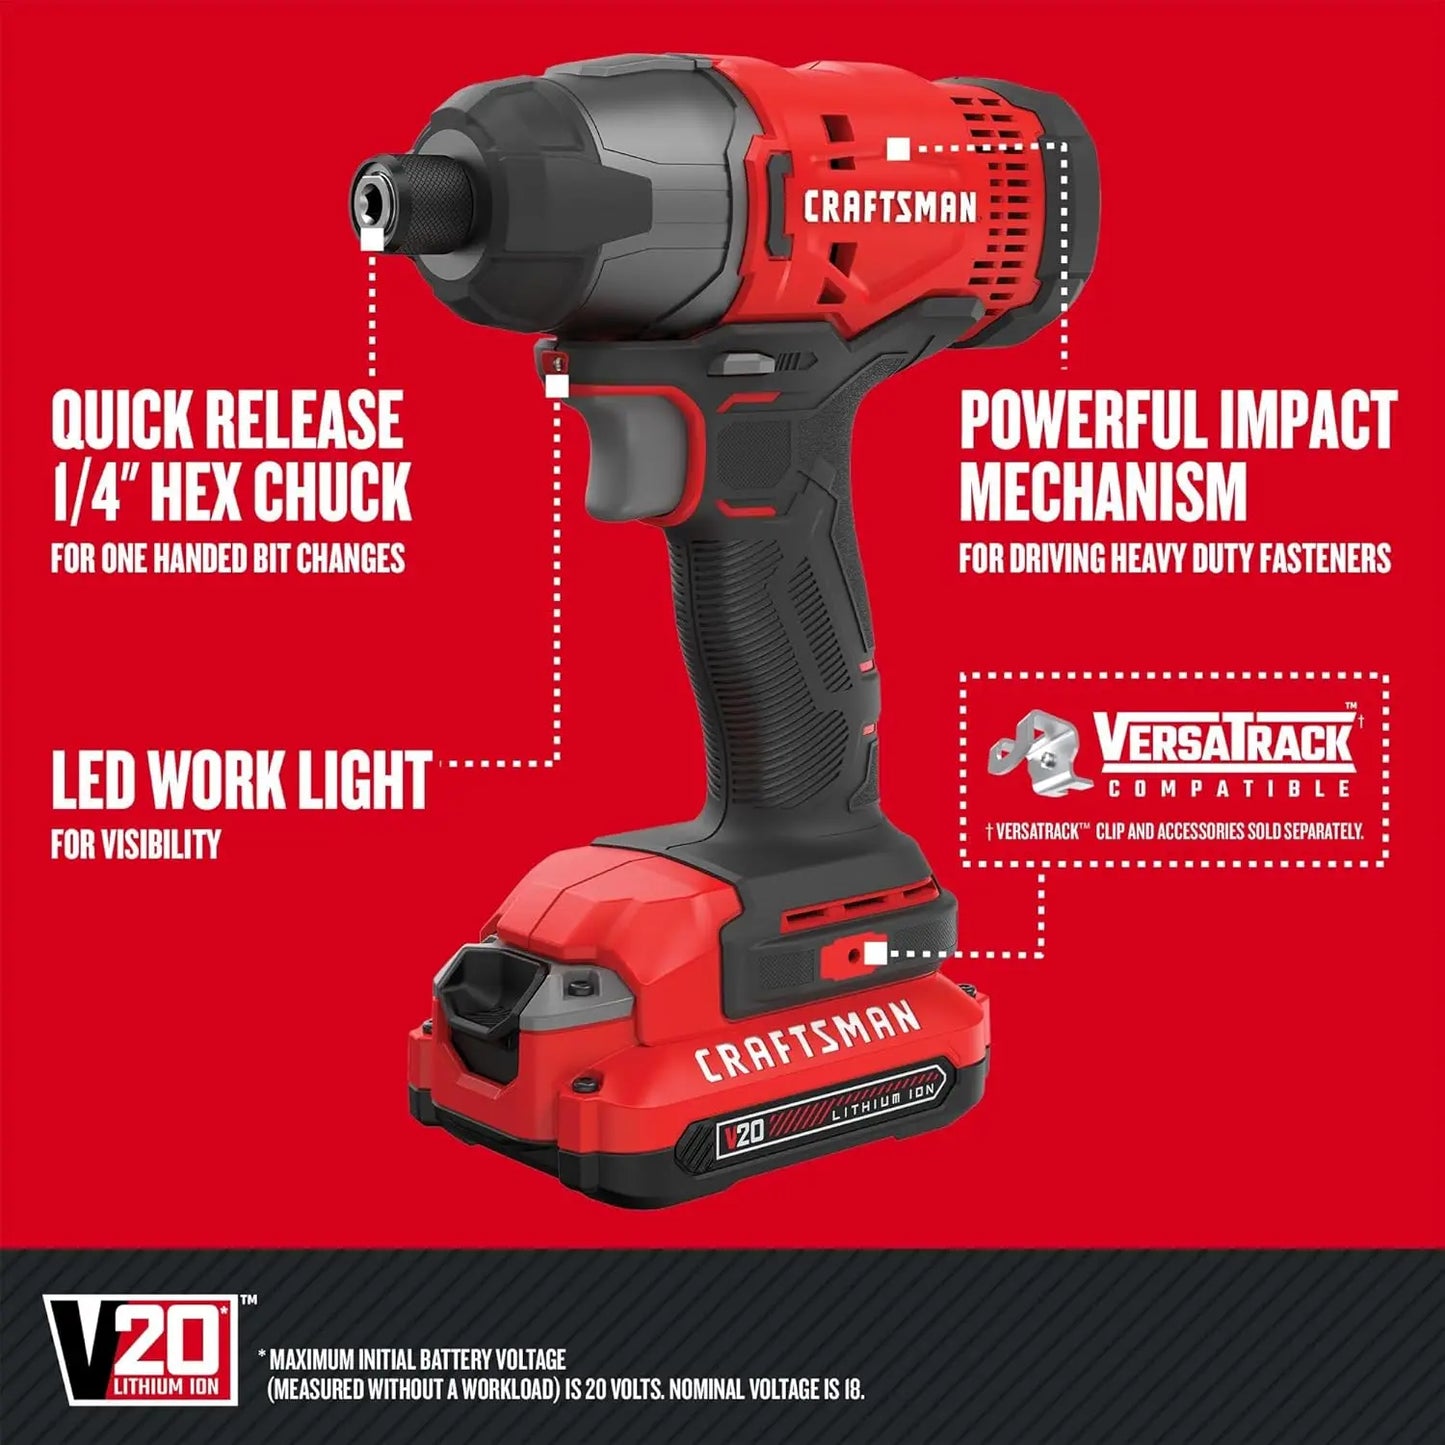 V20 MAX Cordless Drill and Impact Driver, with 2 Batteries and Charger (CMCK200C2AM)